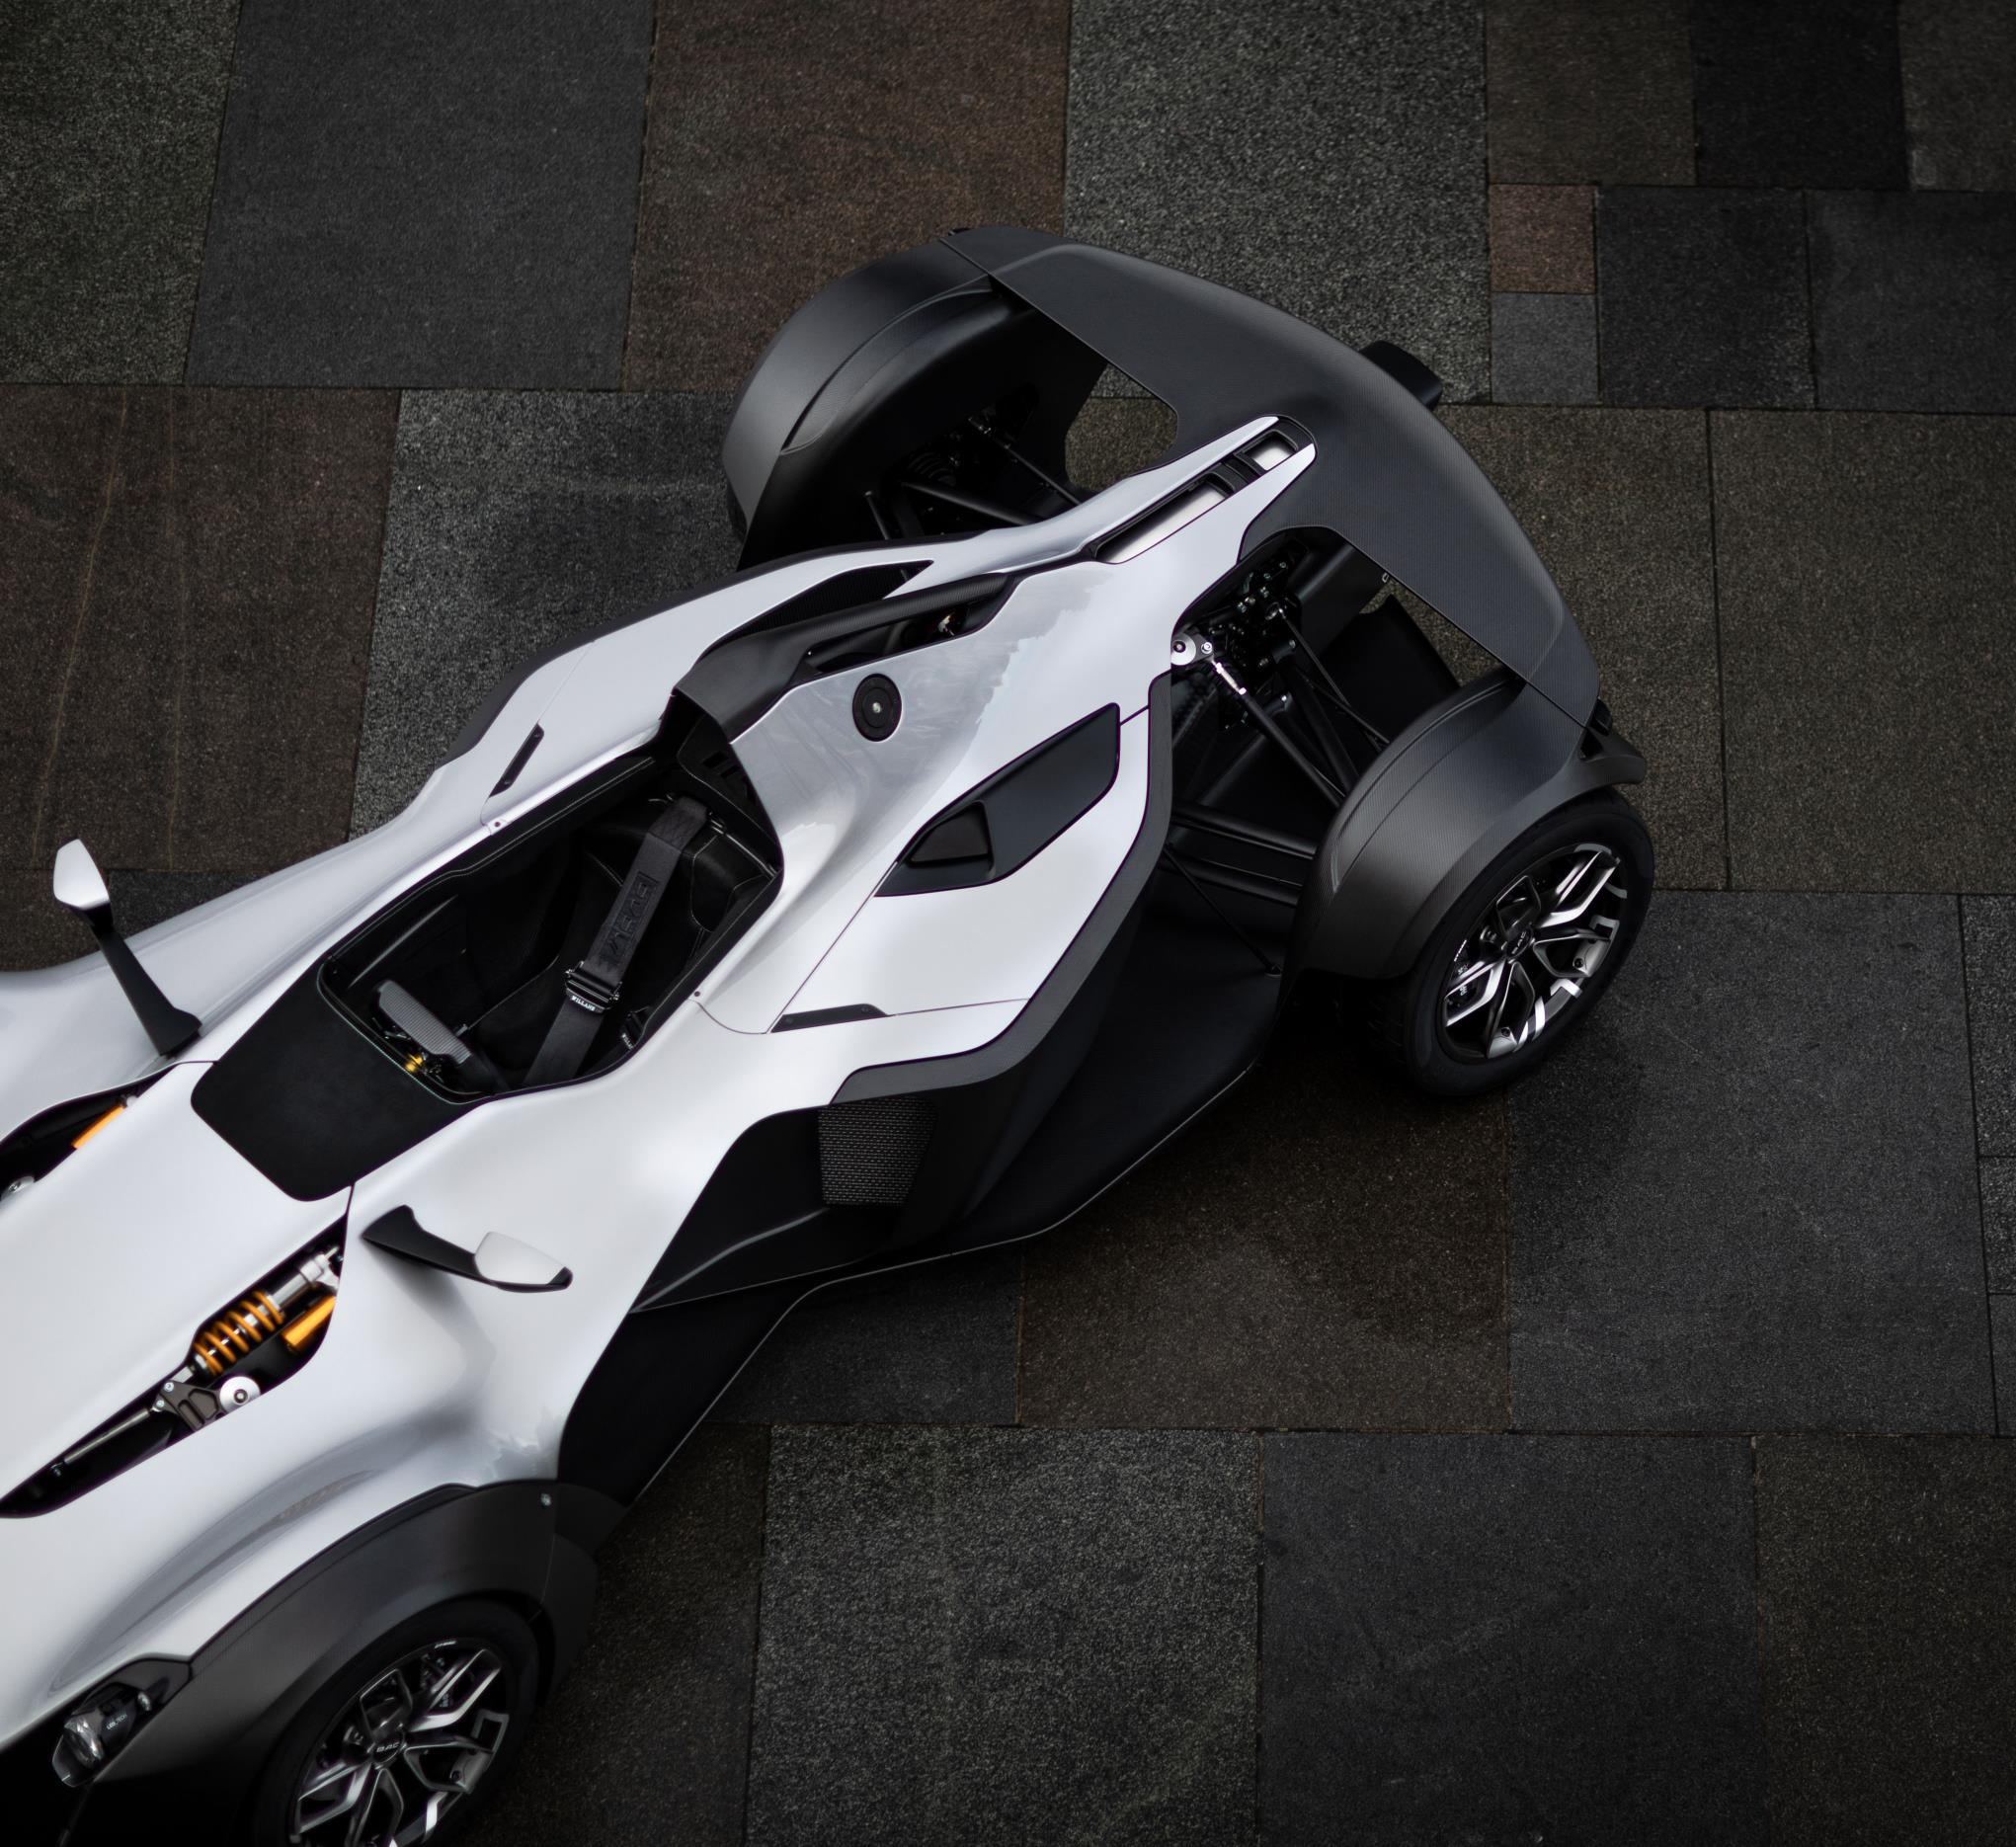 2021 BAC Mono Gen 2 Switches to Ford's 2.3Liter EcoBoost